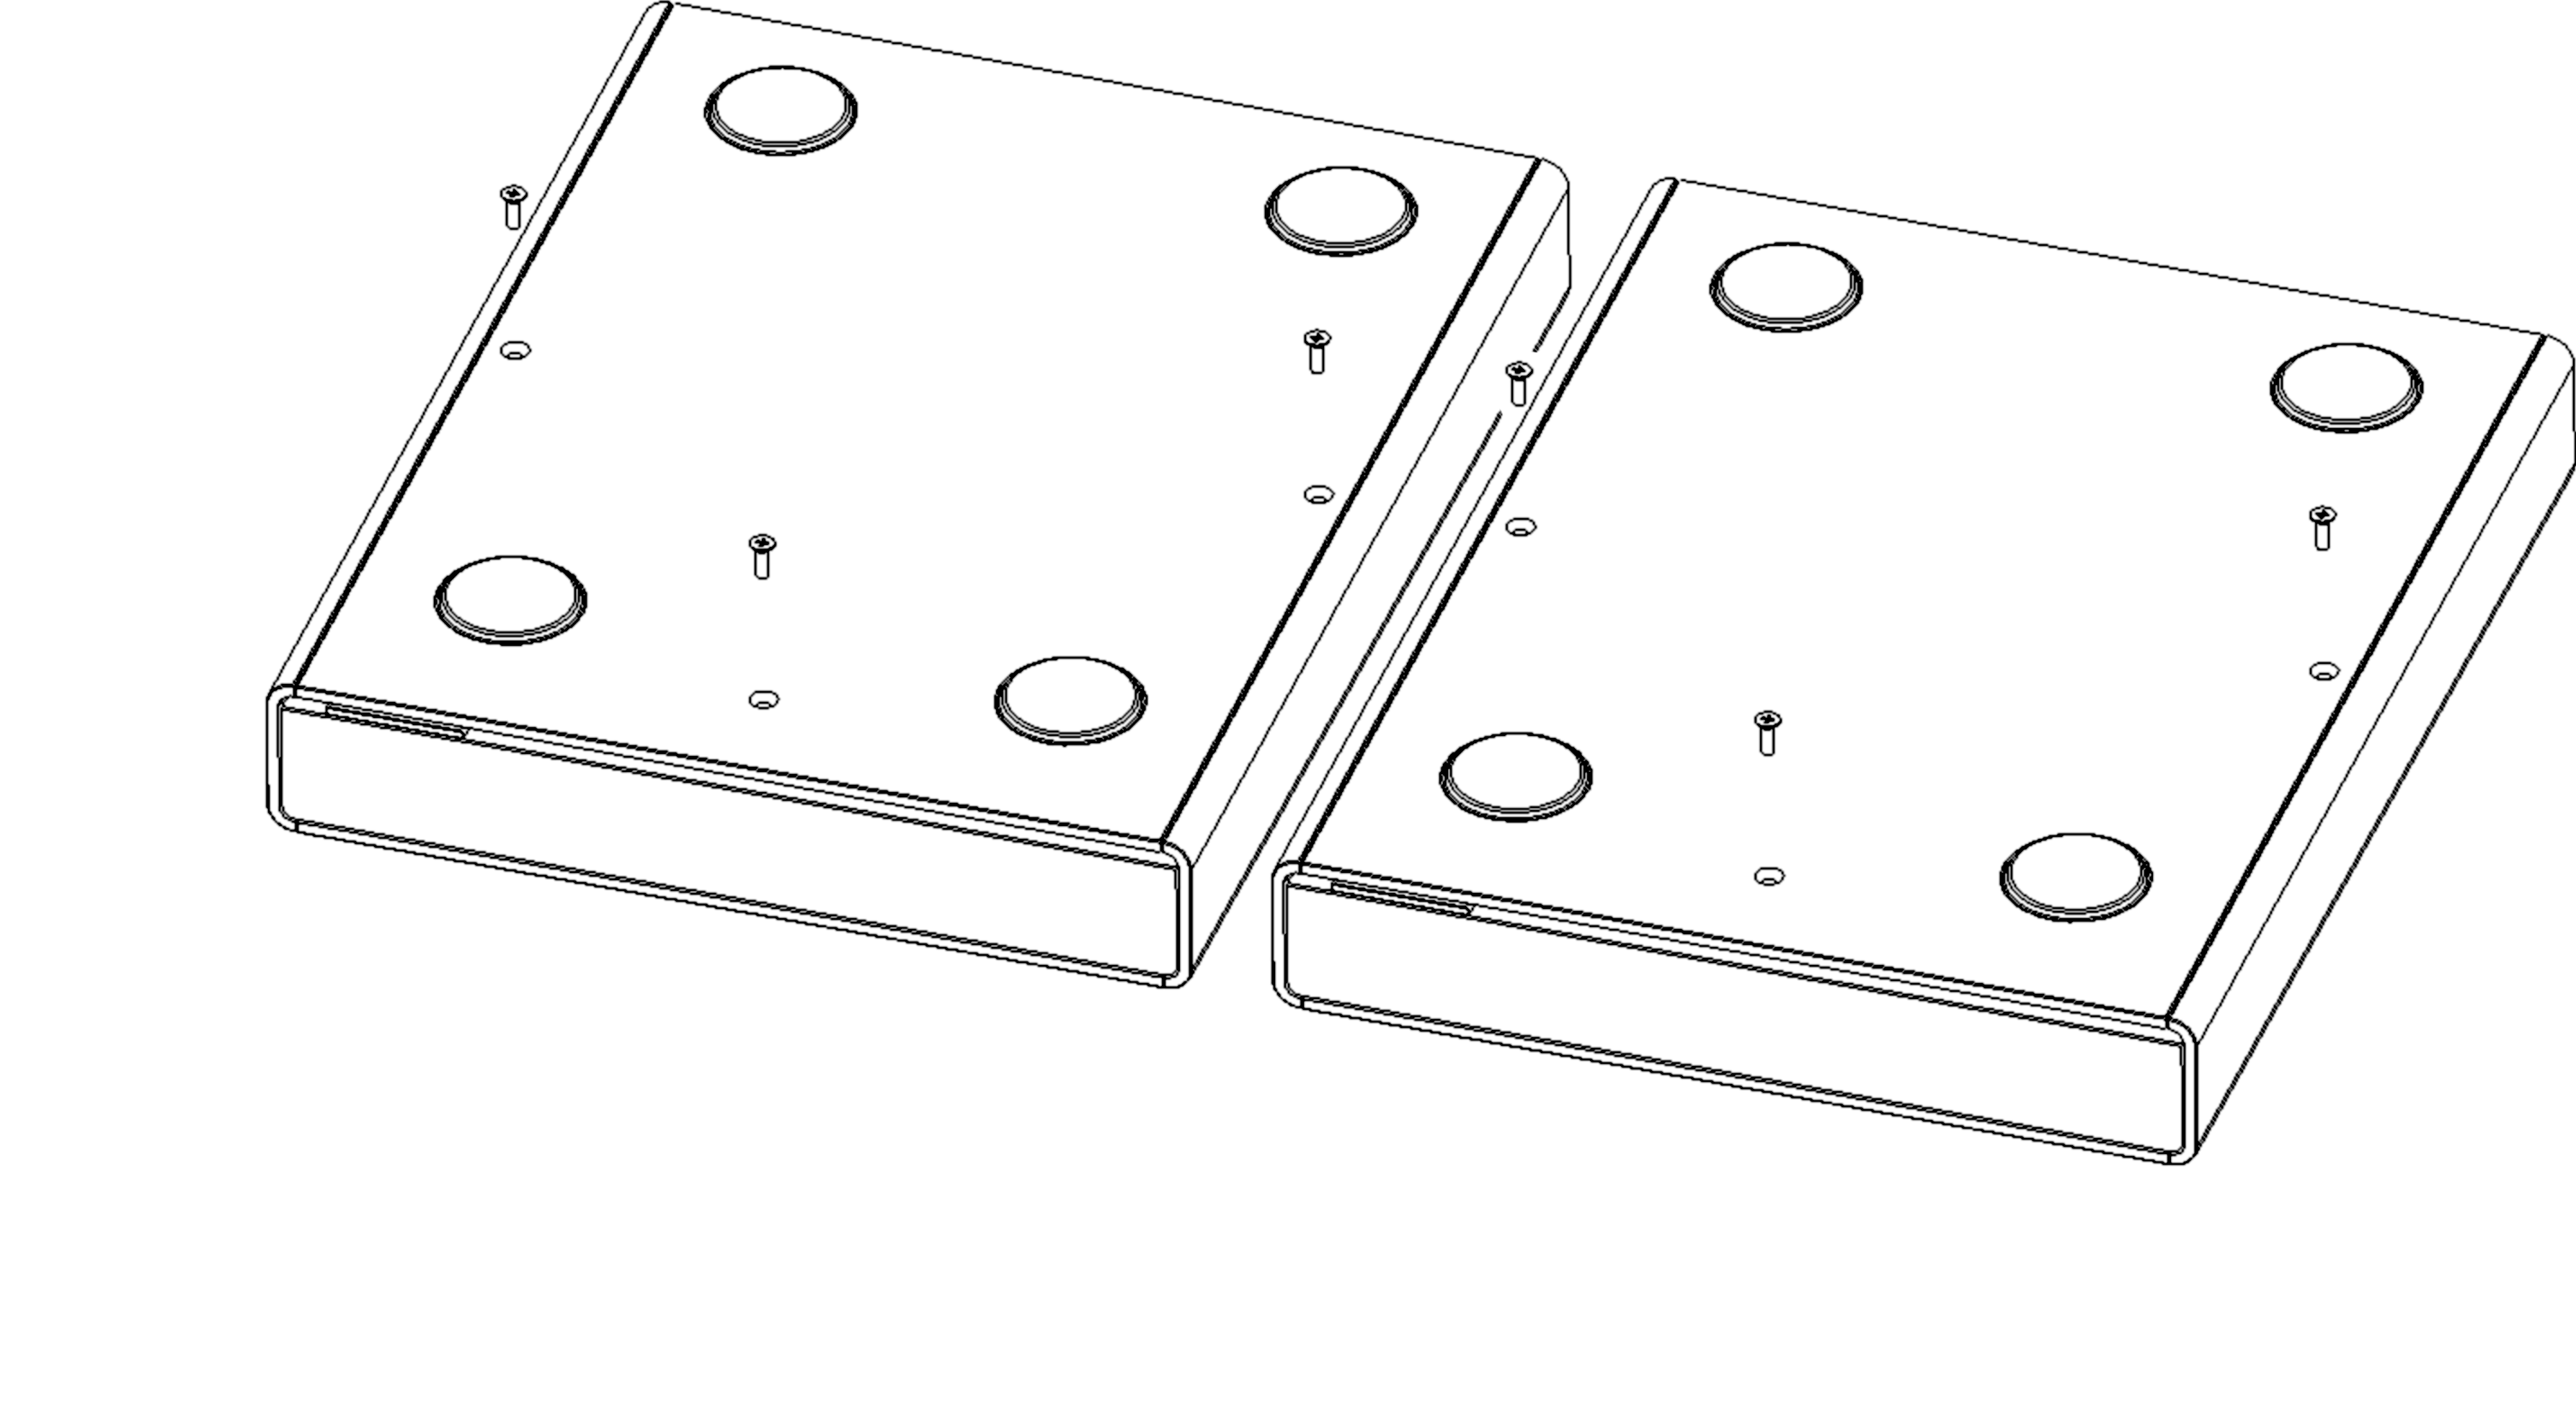 Remove 3 screws from each unit